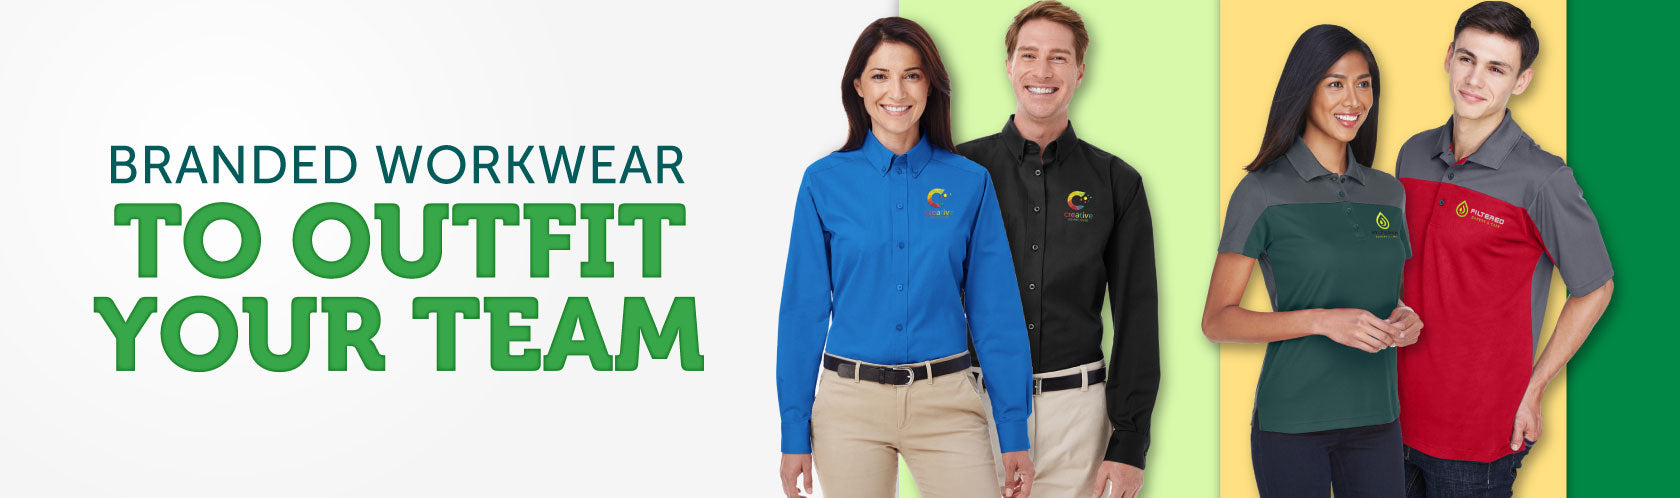 Branded Workwear to Outfit Your Team